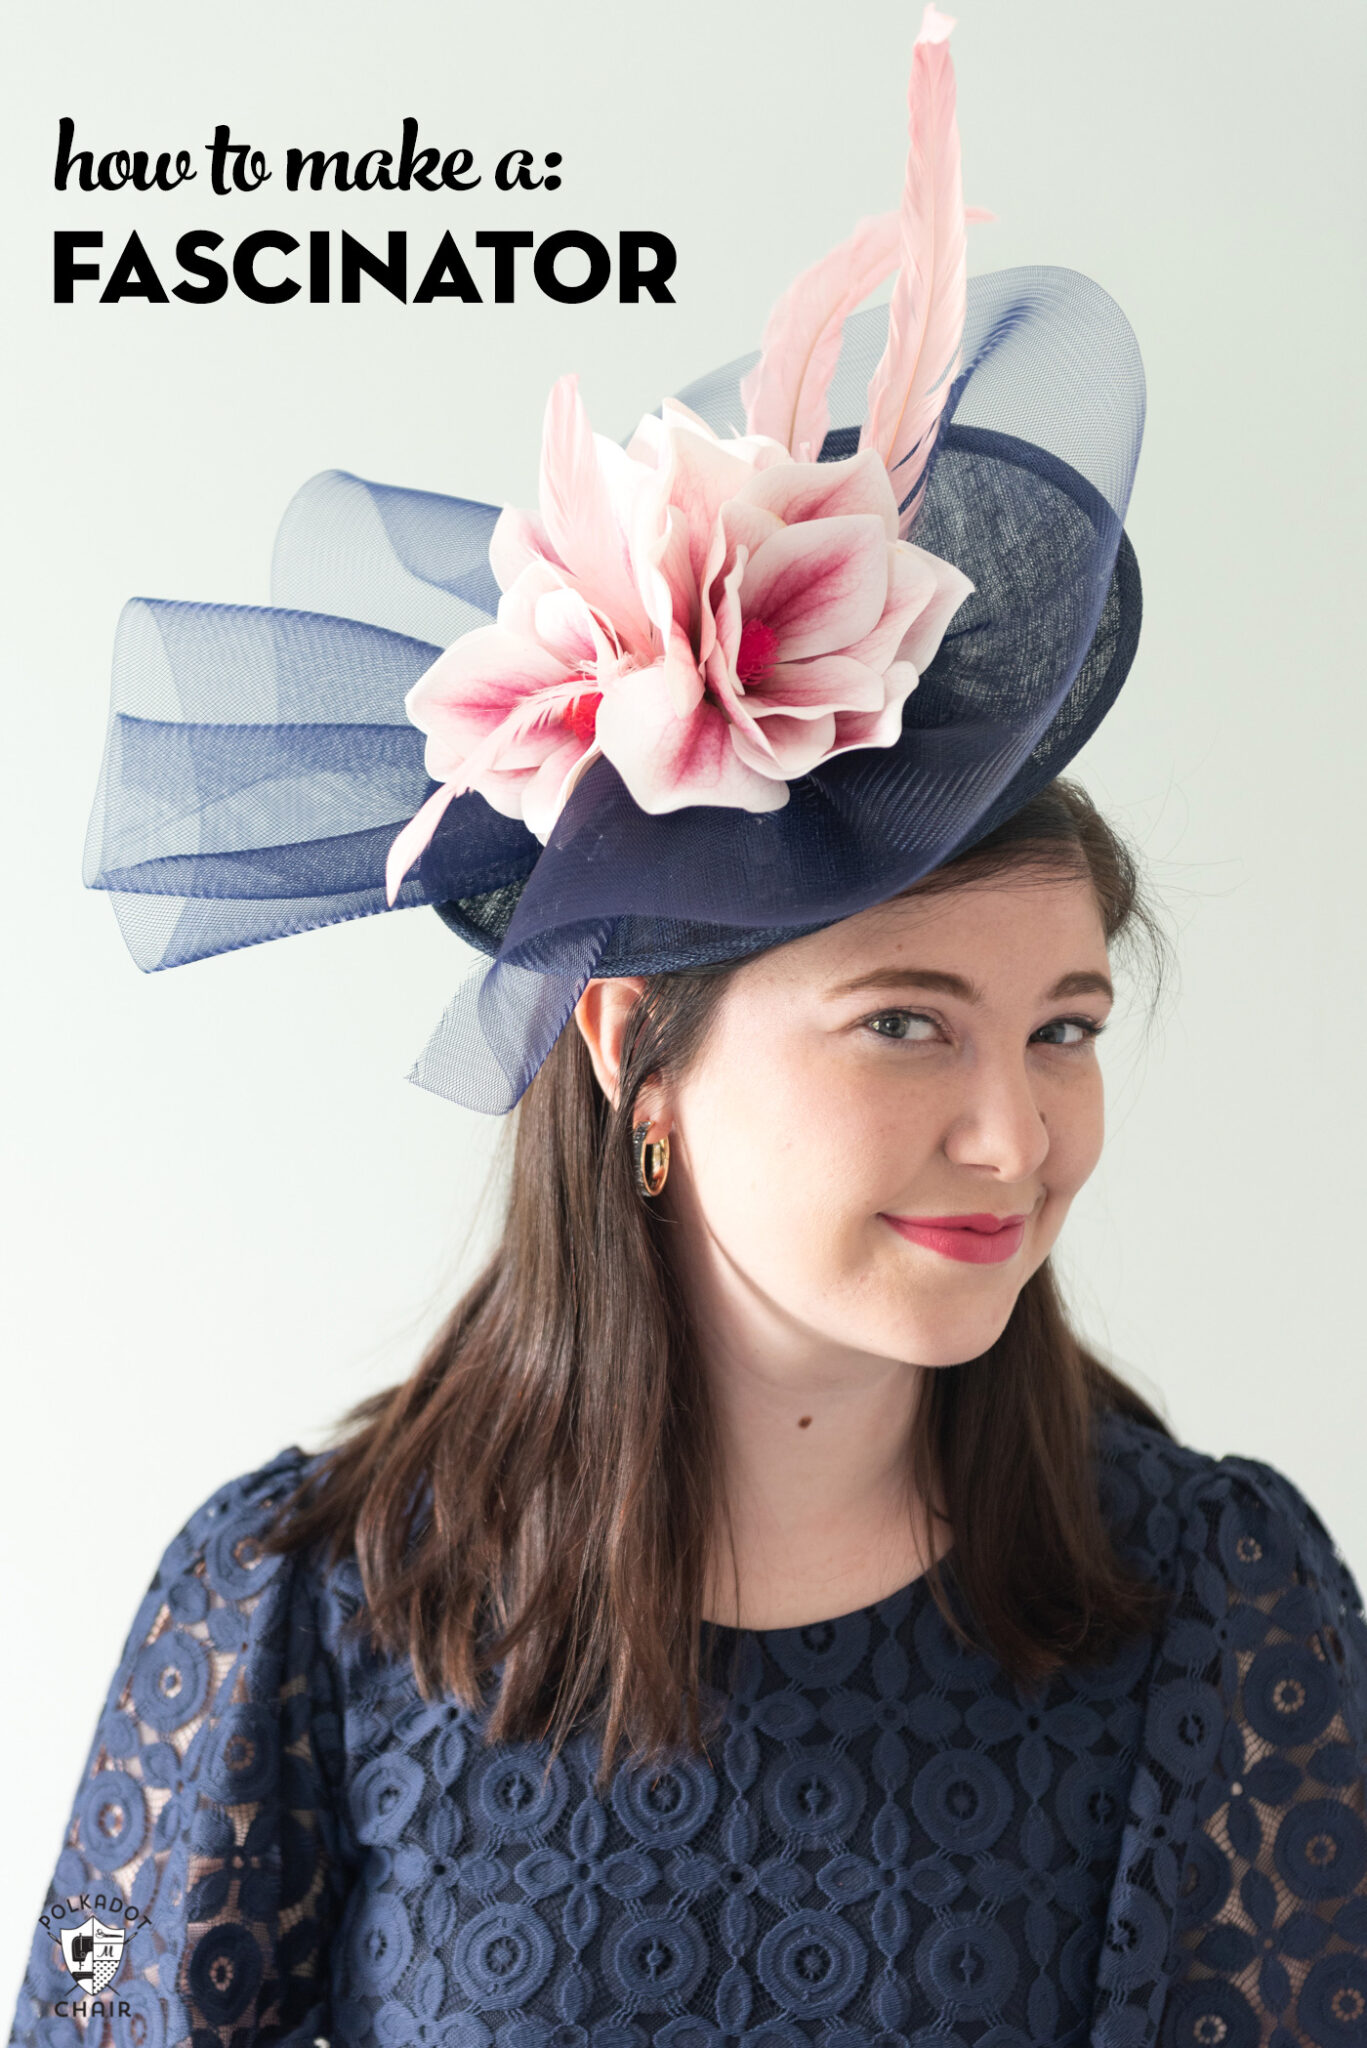 How to Make a Fascinator Perfect for the Derby! The Polka Dot Chair